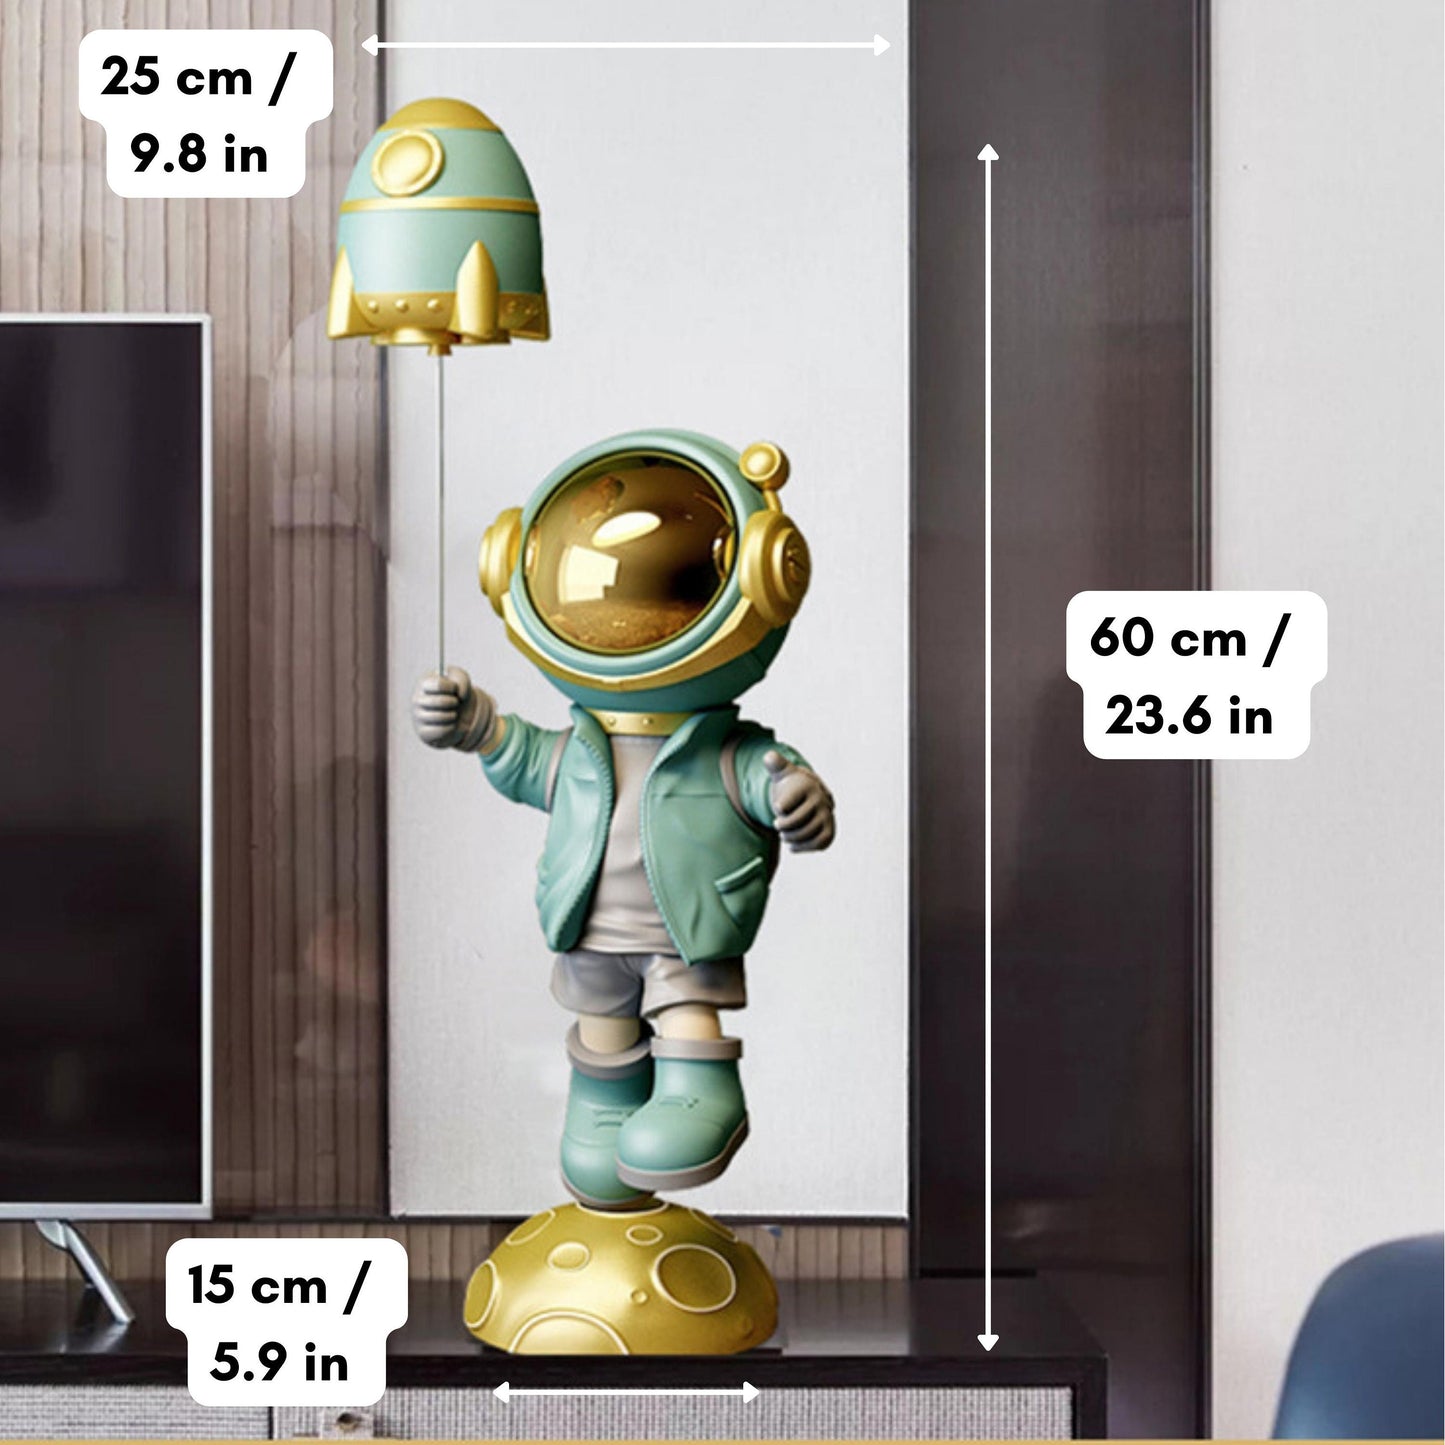 Astronaut Holding a Rocket Balloon Statue - Space Mesmerise - Space Gifts | Lamps | Statues | Home Decor